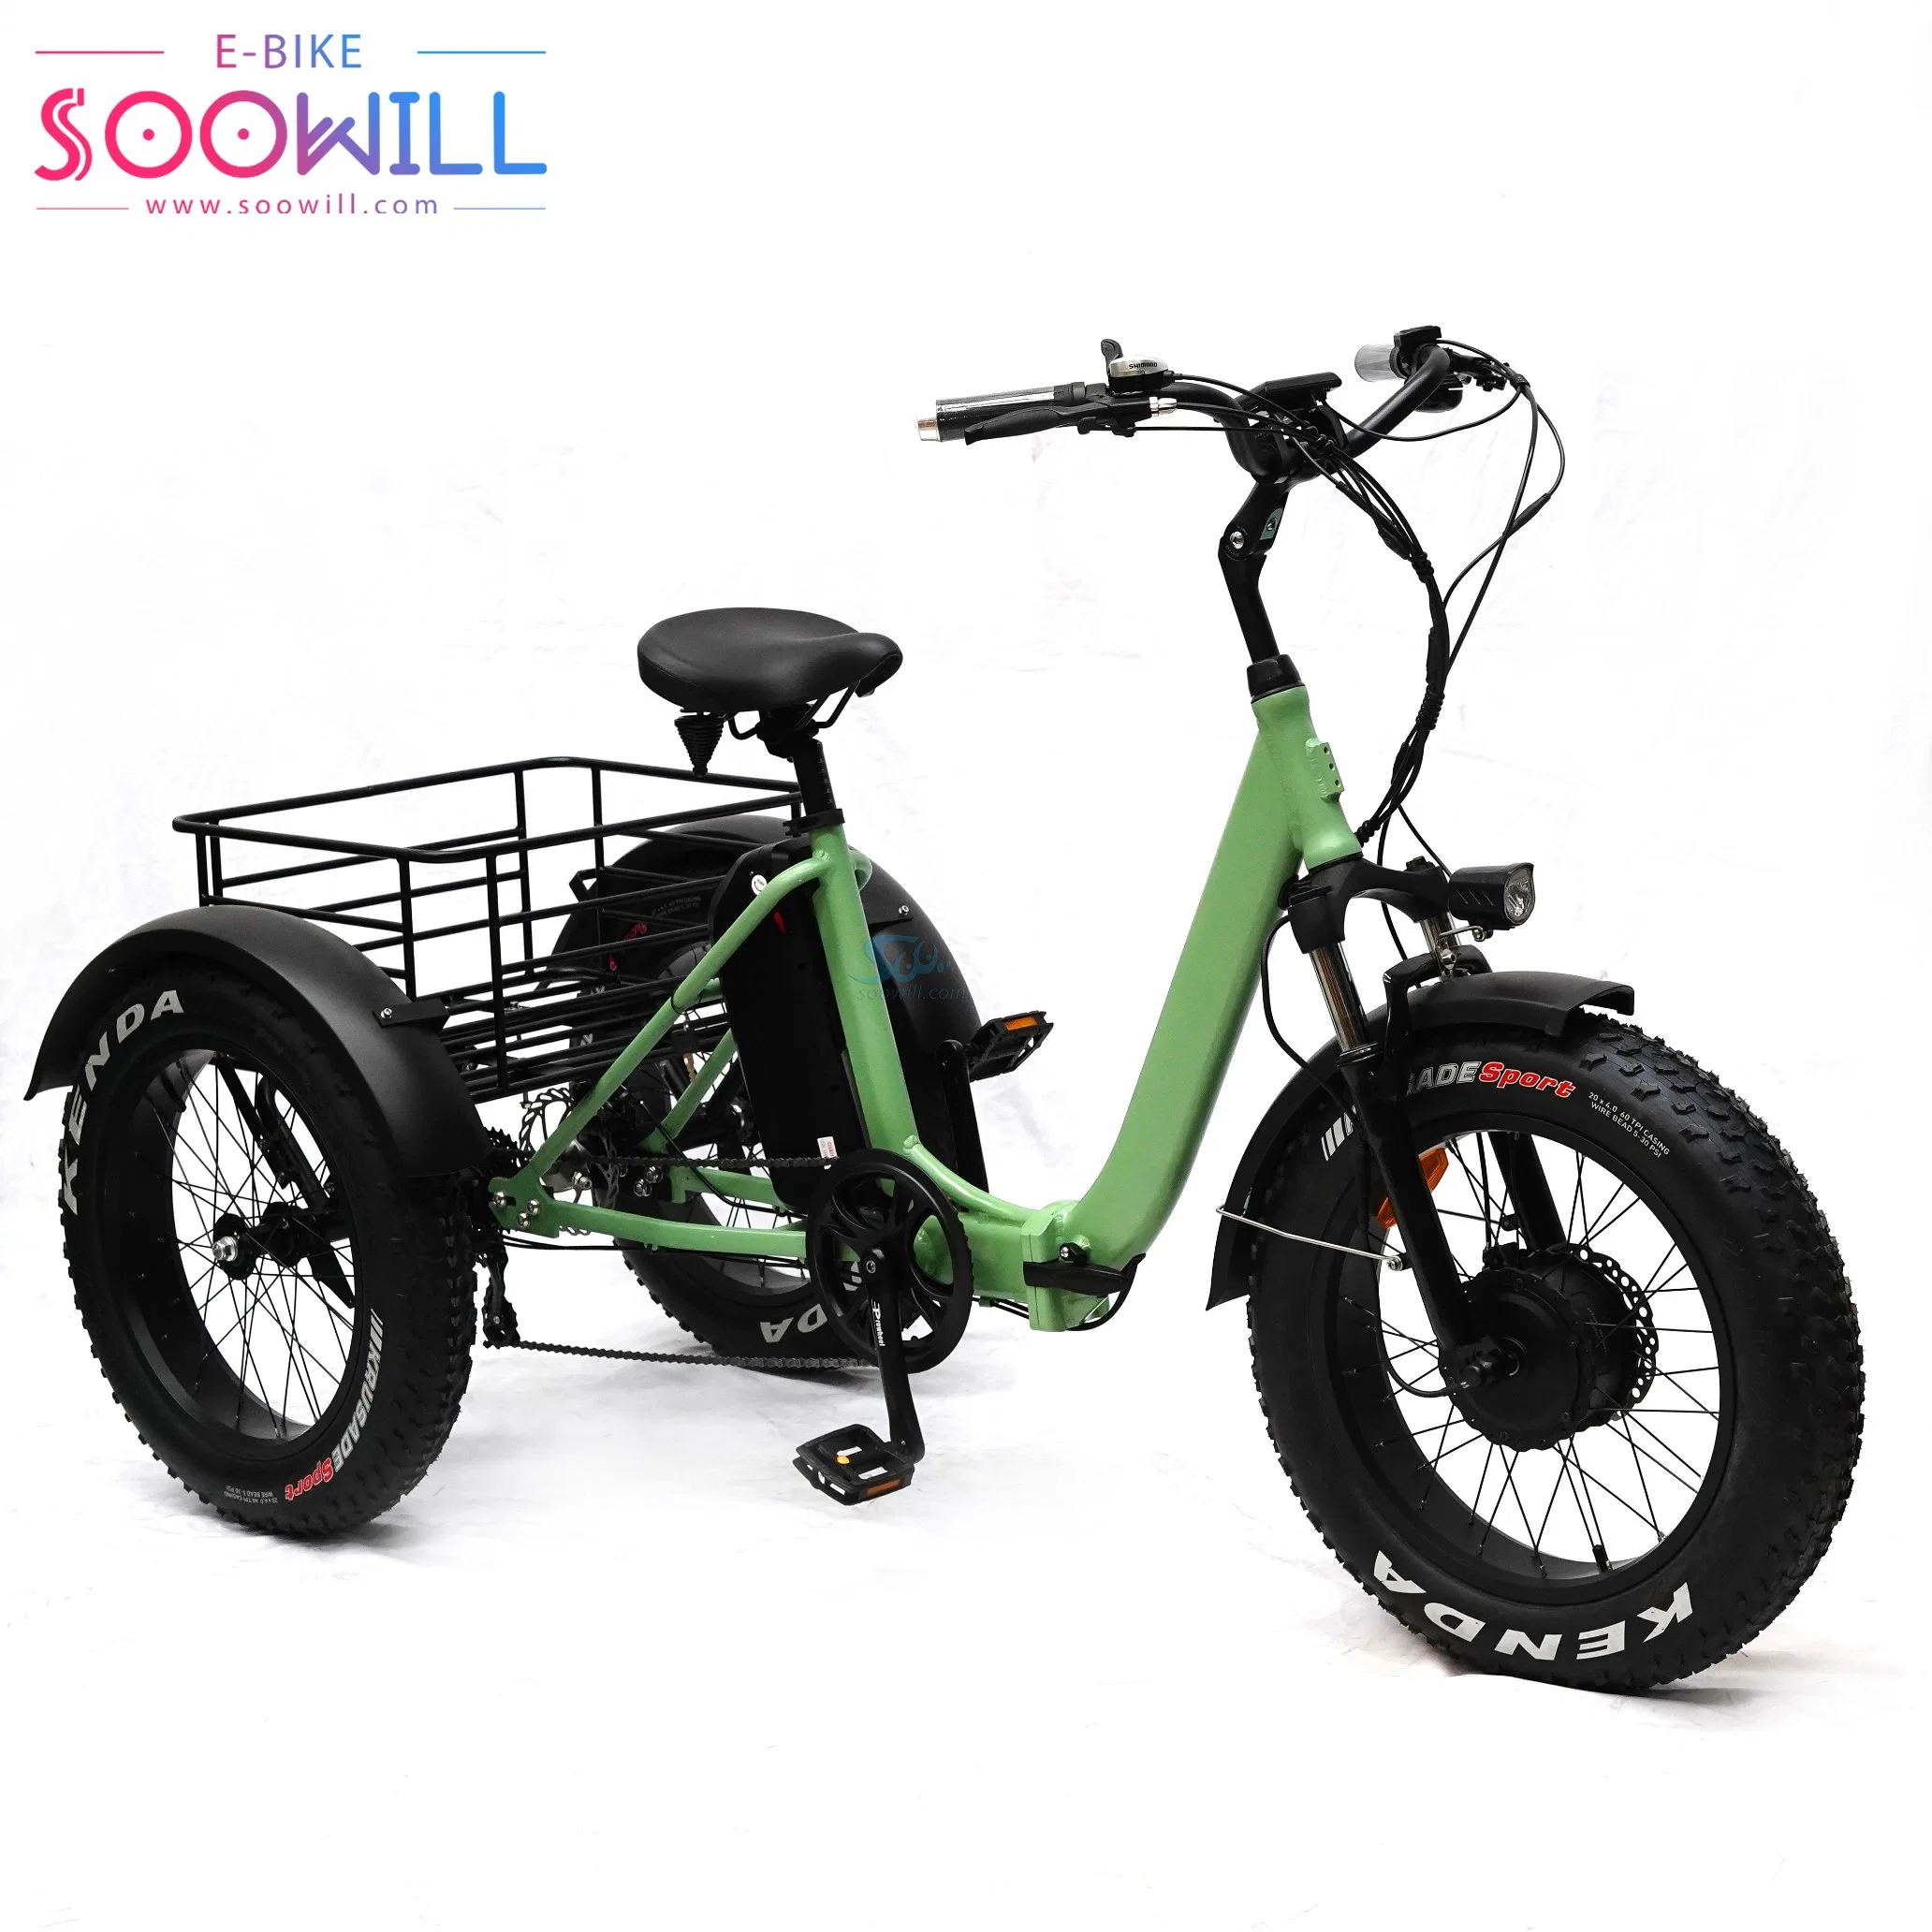 China Factory Supplied Top Quality Rear Hub Motor Kids Dirt Foldable Electric City Bike 500W 20 Inch